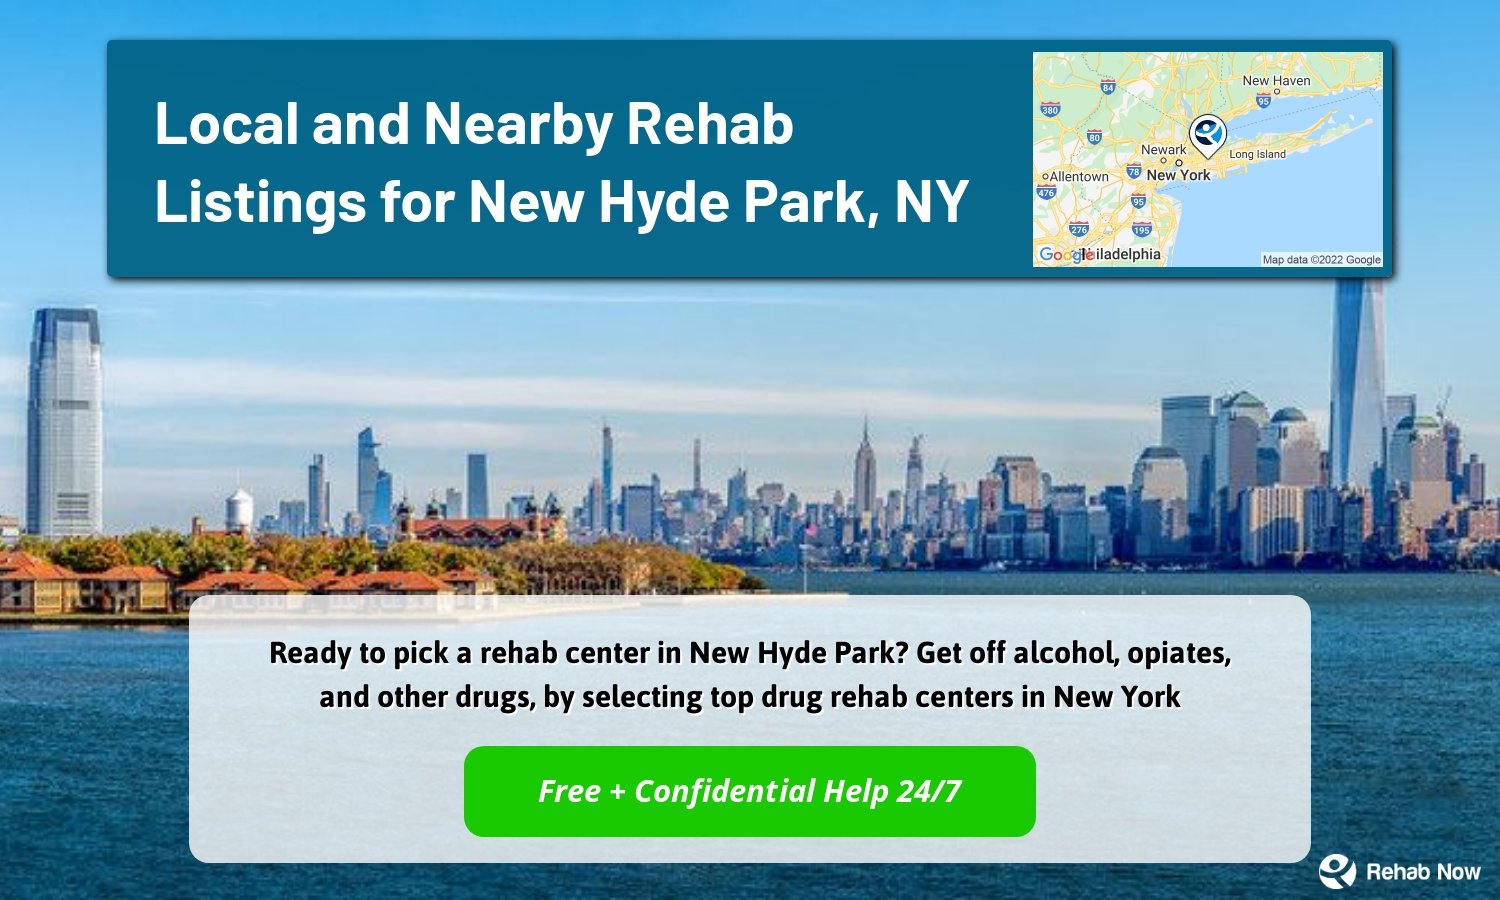 Ready to pick a rehab center in New Hyde Park? Get off alcohol, opiates, and other drugs, by selecting top drug rehab centers in New York